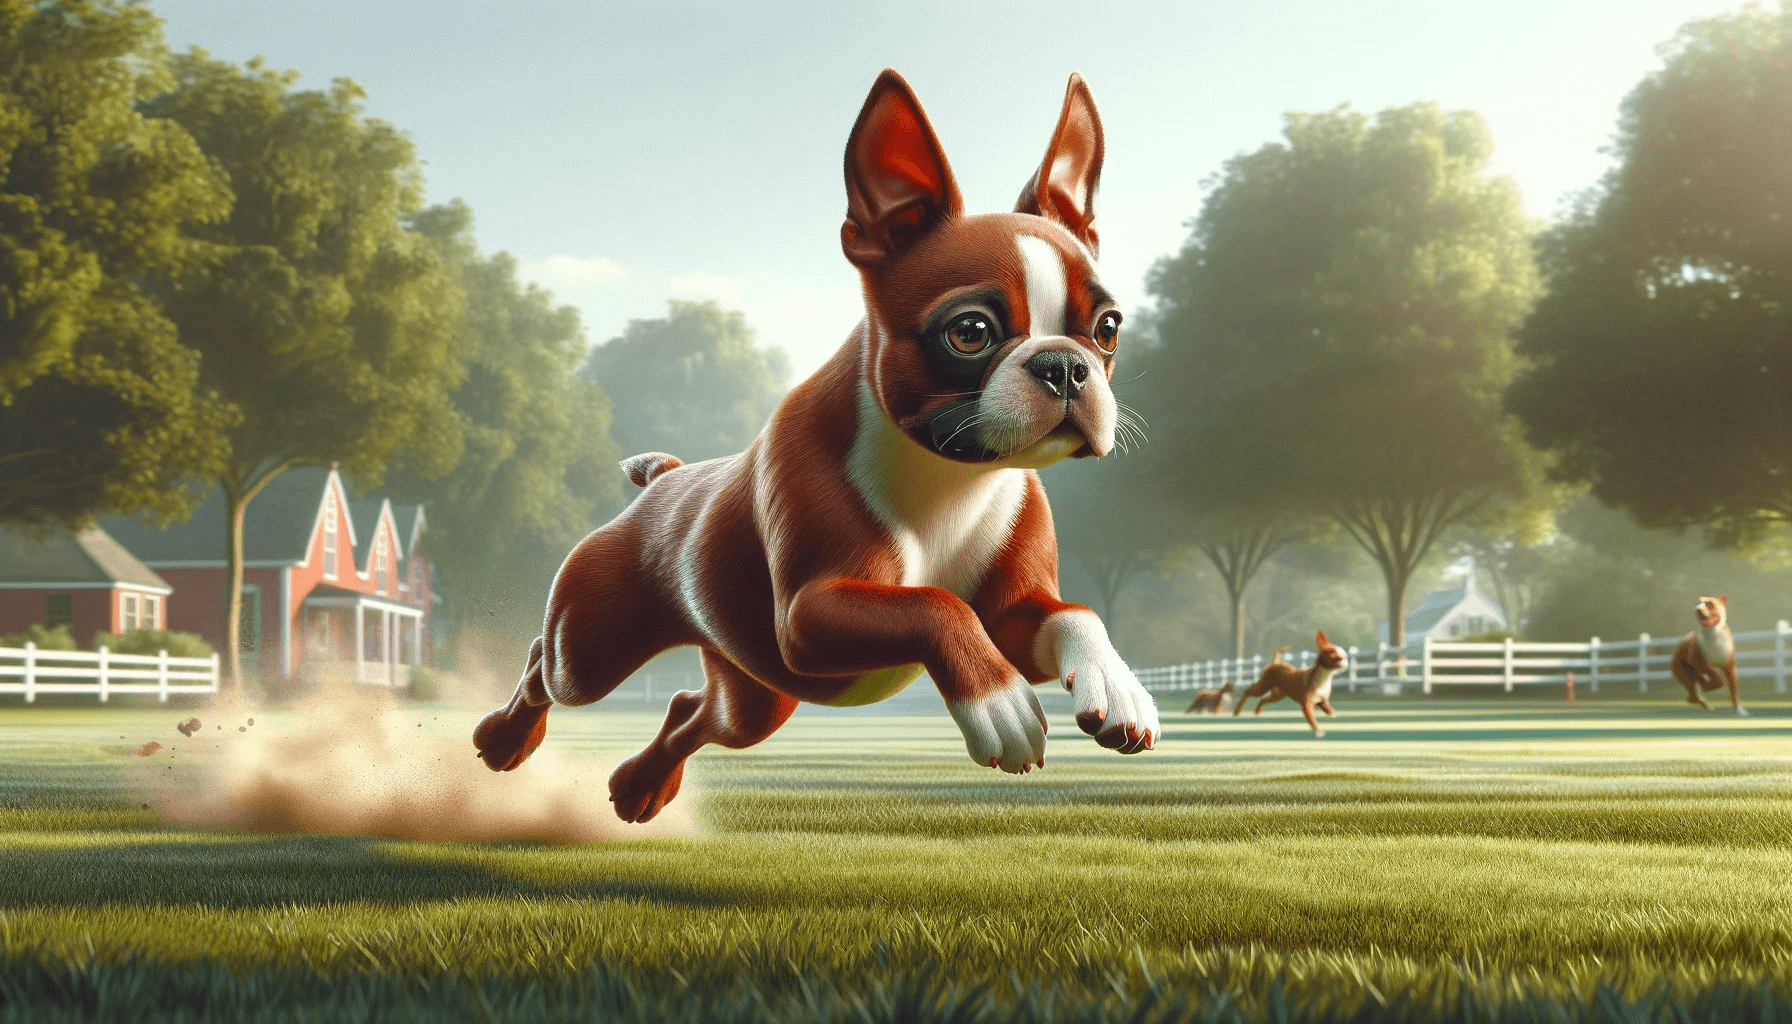 Red Boston Terrier Engaged in Play or Exercise - Running Across a Park